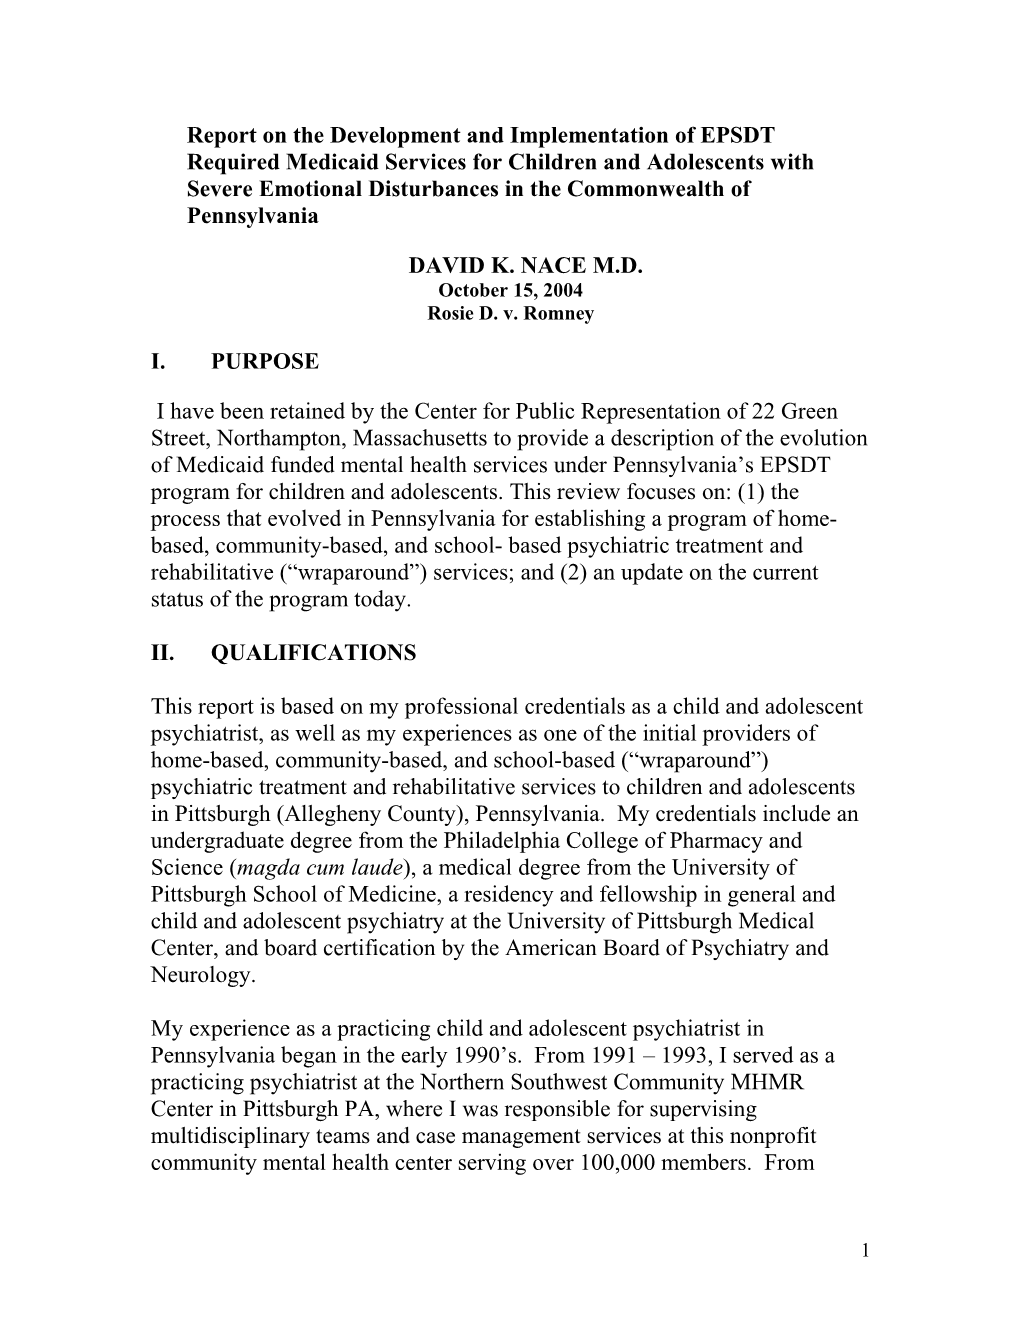 Report on the Development and Implementation of EPSDT Required Medicaid Services for Children